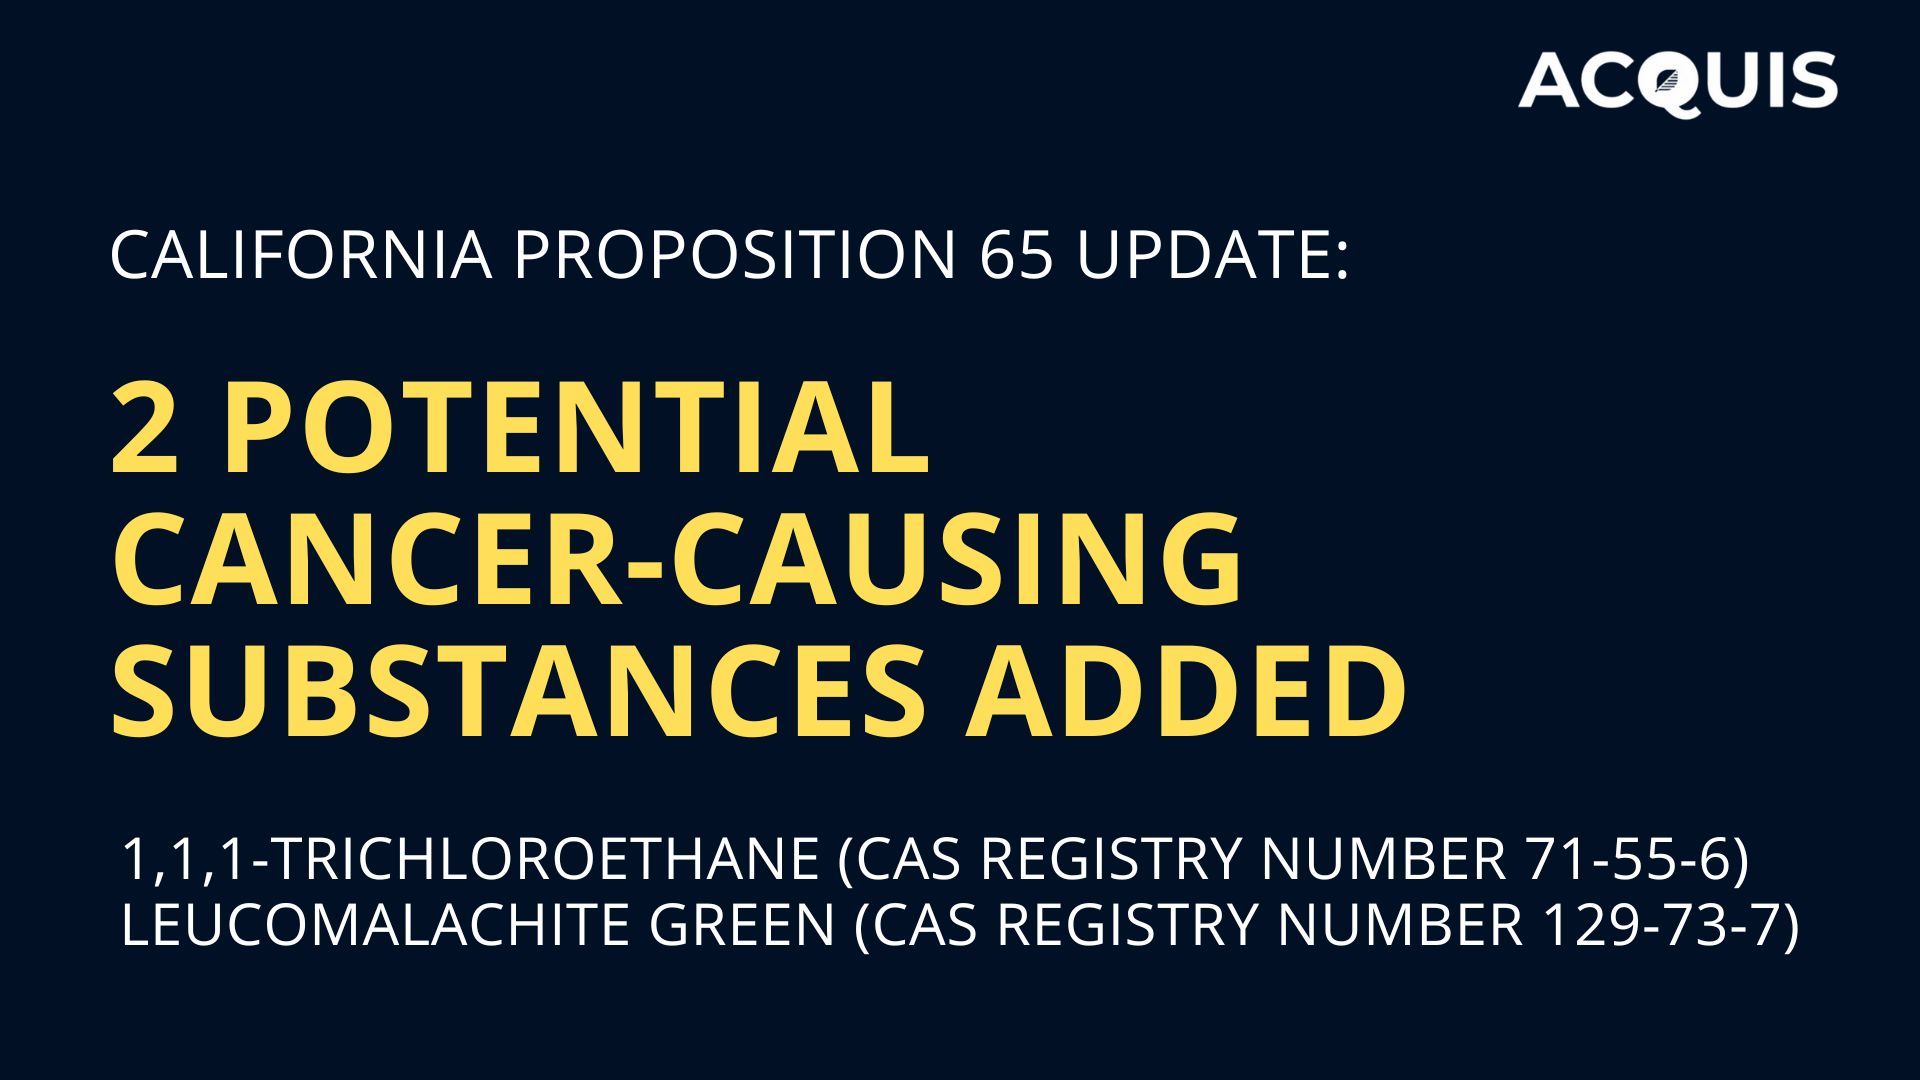 California Proposition 65 List Update: 2 New Potential Cancer-Causing Substances Added